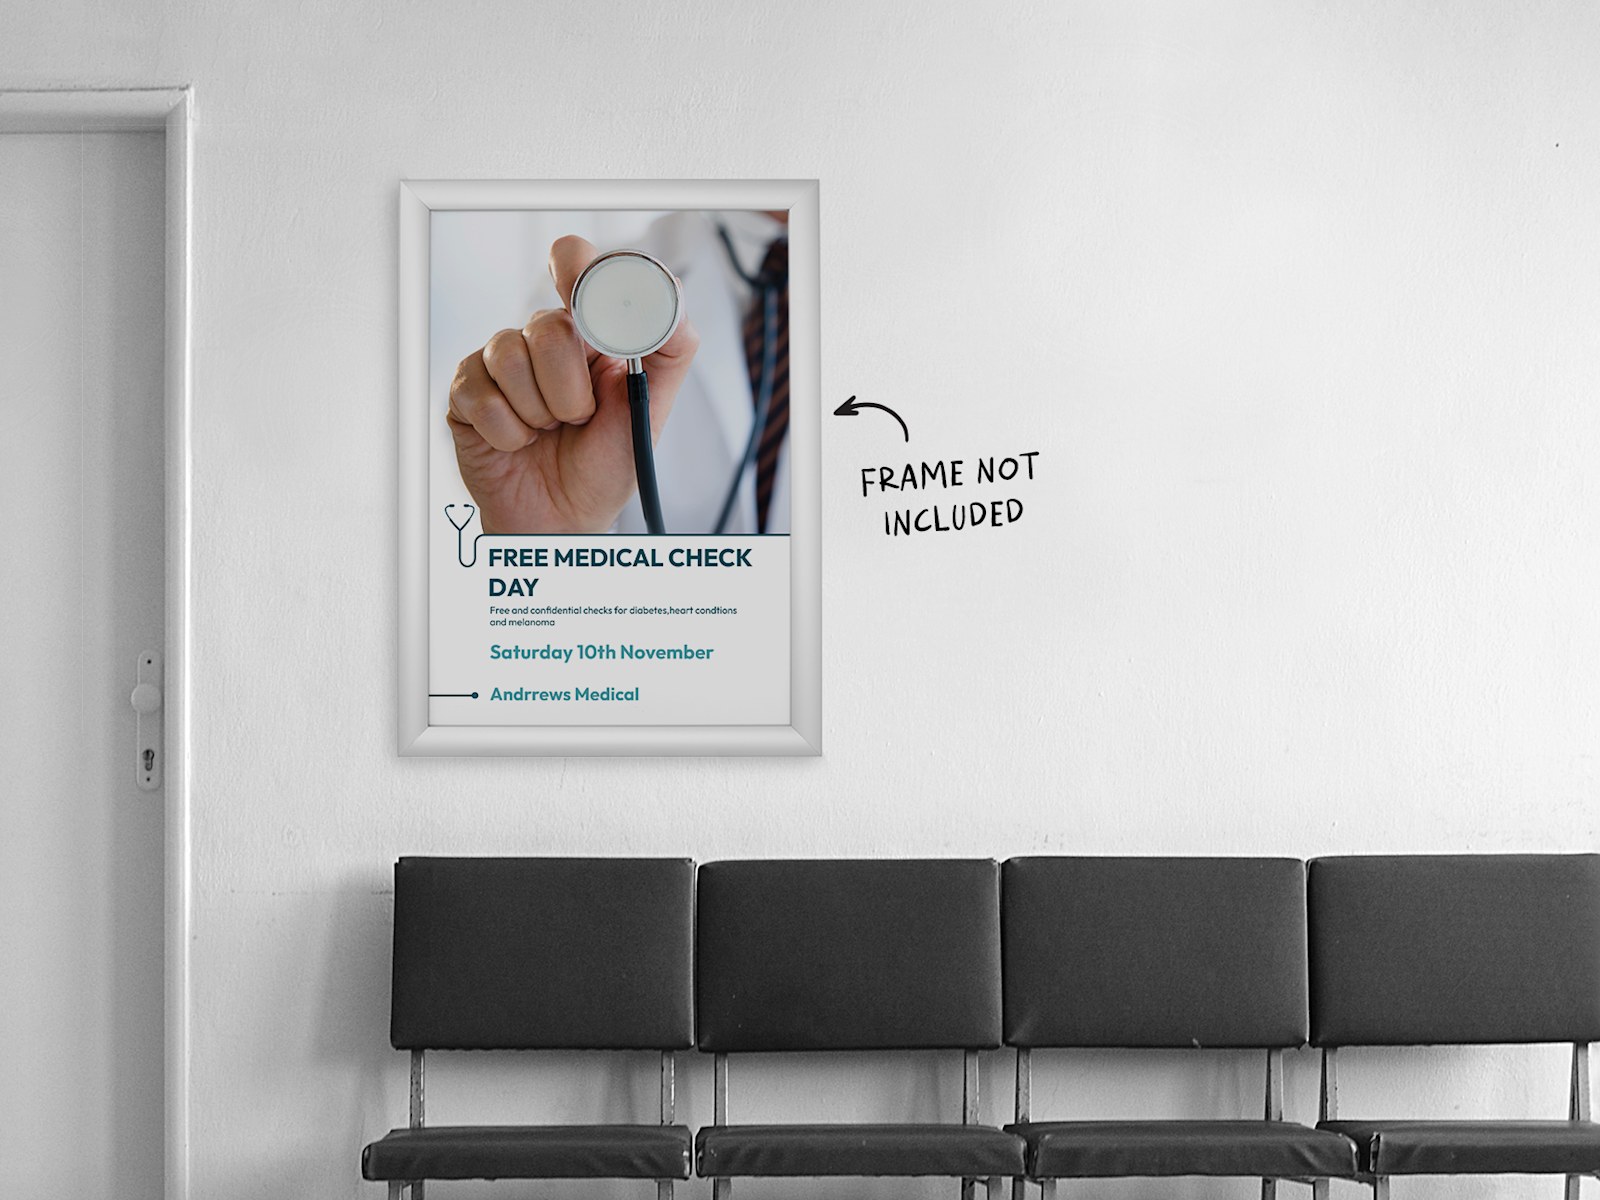 A framed poster hung in a doctor's waiting room. The frame is not included with the purchase of the poster.